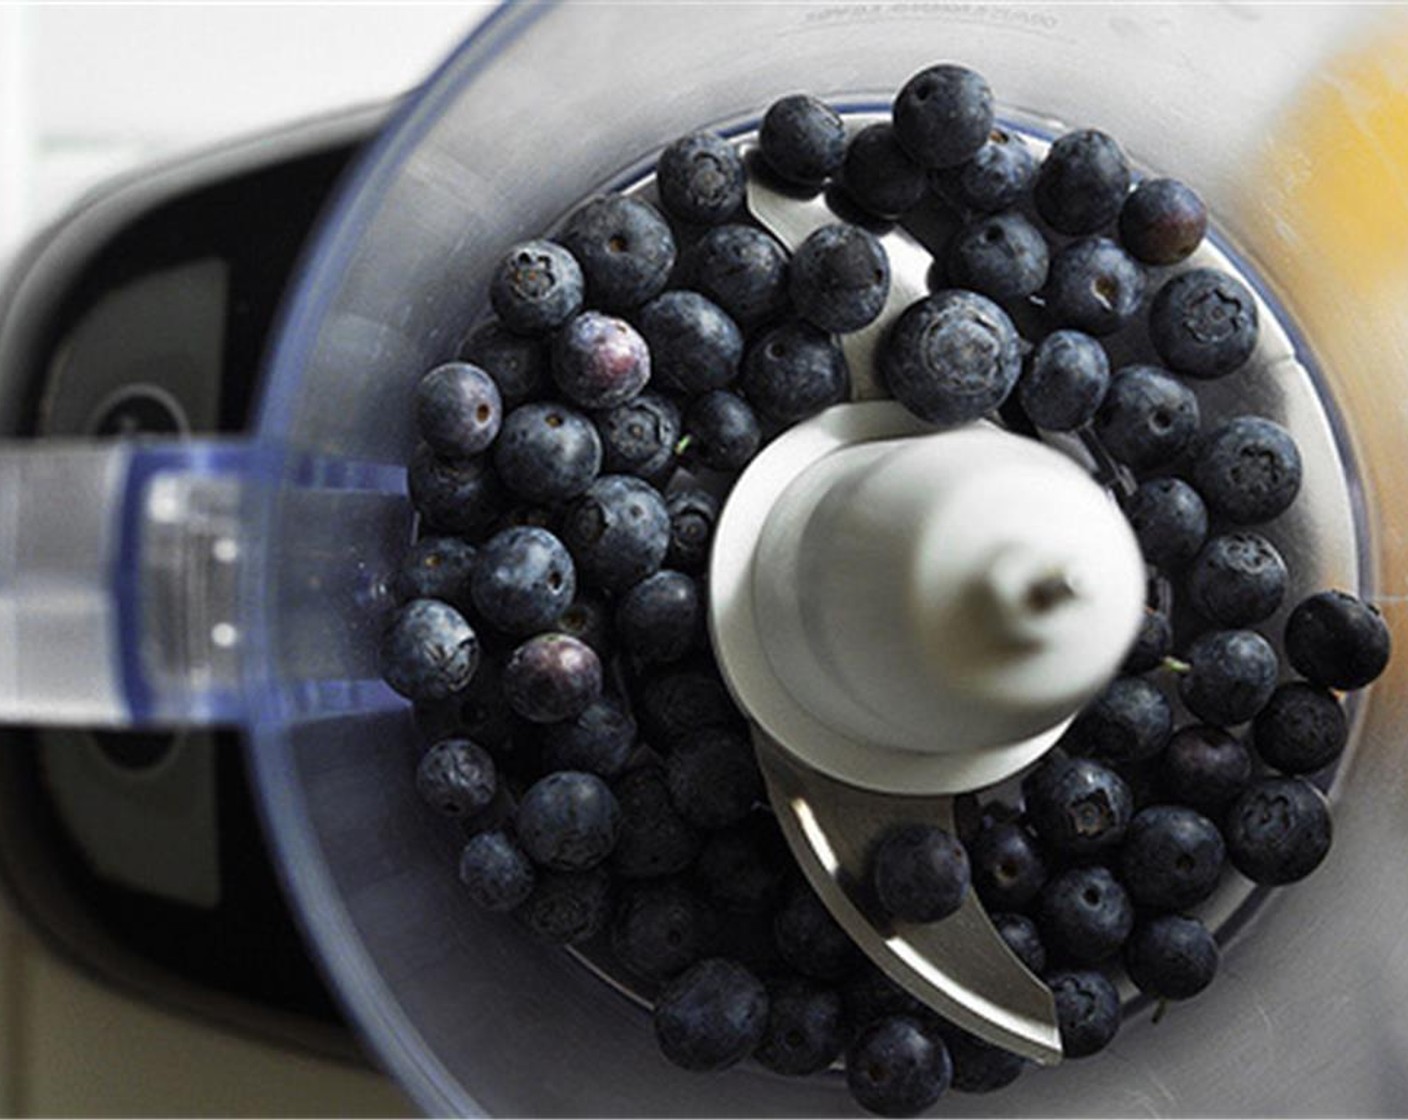 step 12 Allow to cool and make the glaze. In a food processor, pulse the Fresh Blueberry (1 cup) until a smooth liquid forms and the berries are completely broken down. Add the Fresh Basil (1 Tbsp) and Bourbon (3 Tbsp) and pulse once more until completely smooth.